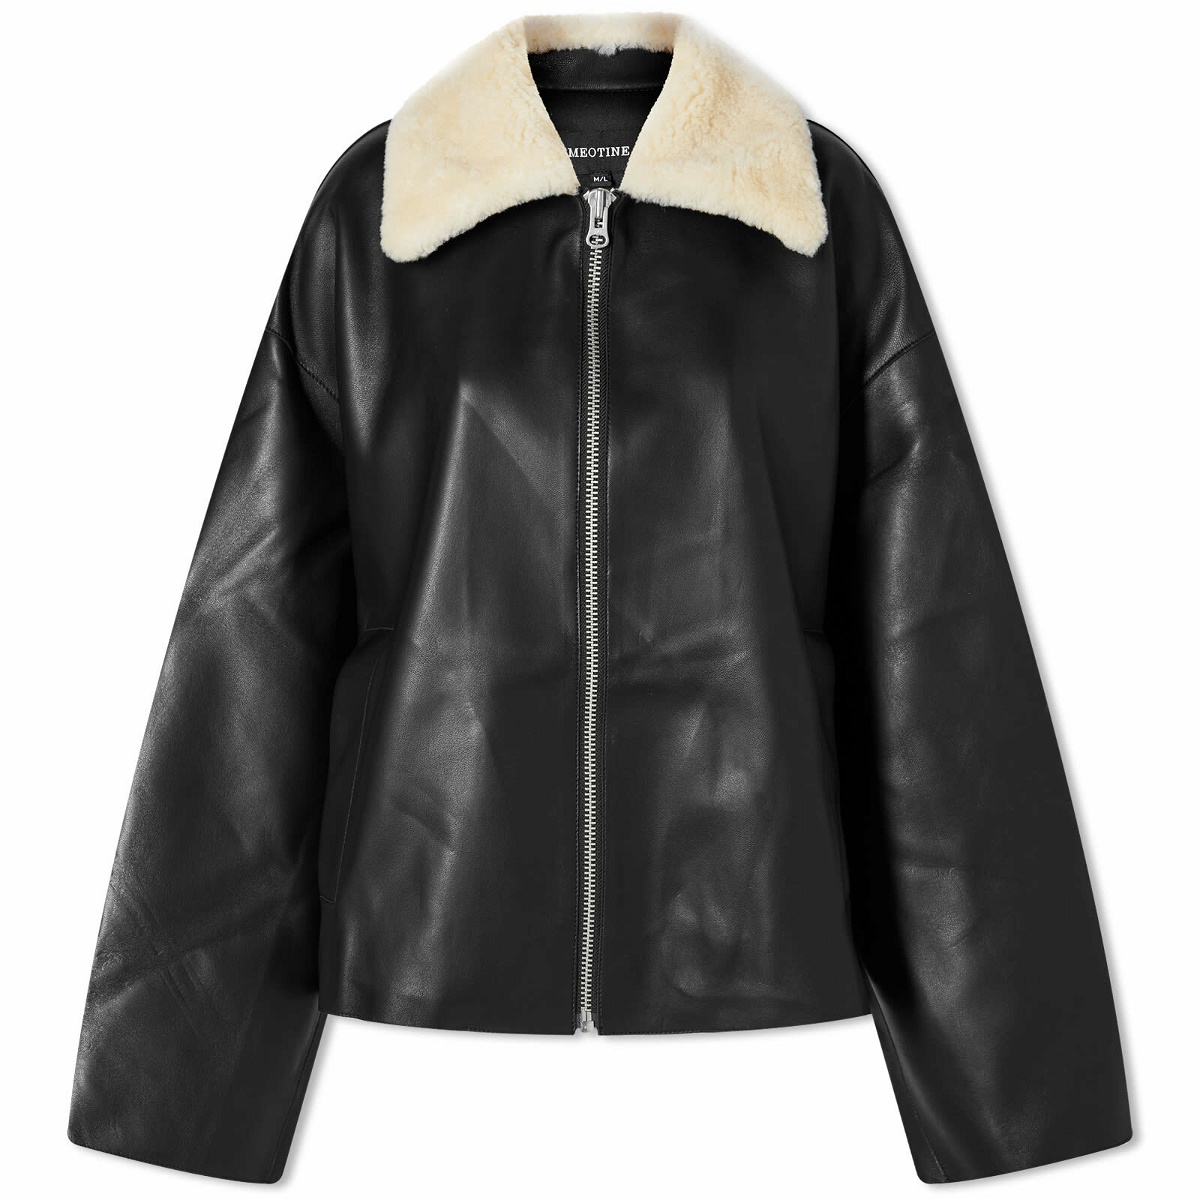 Photo: Meotine Women's Holly Leather Jacket in Black